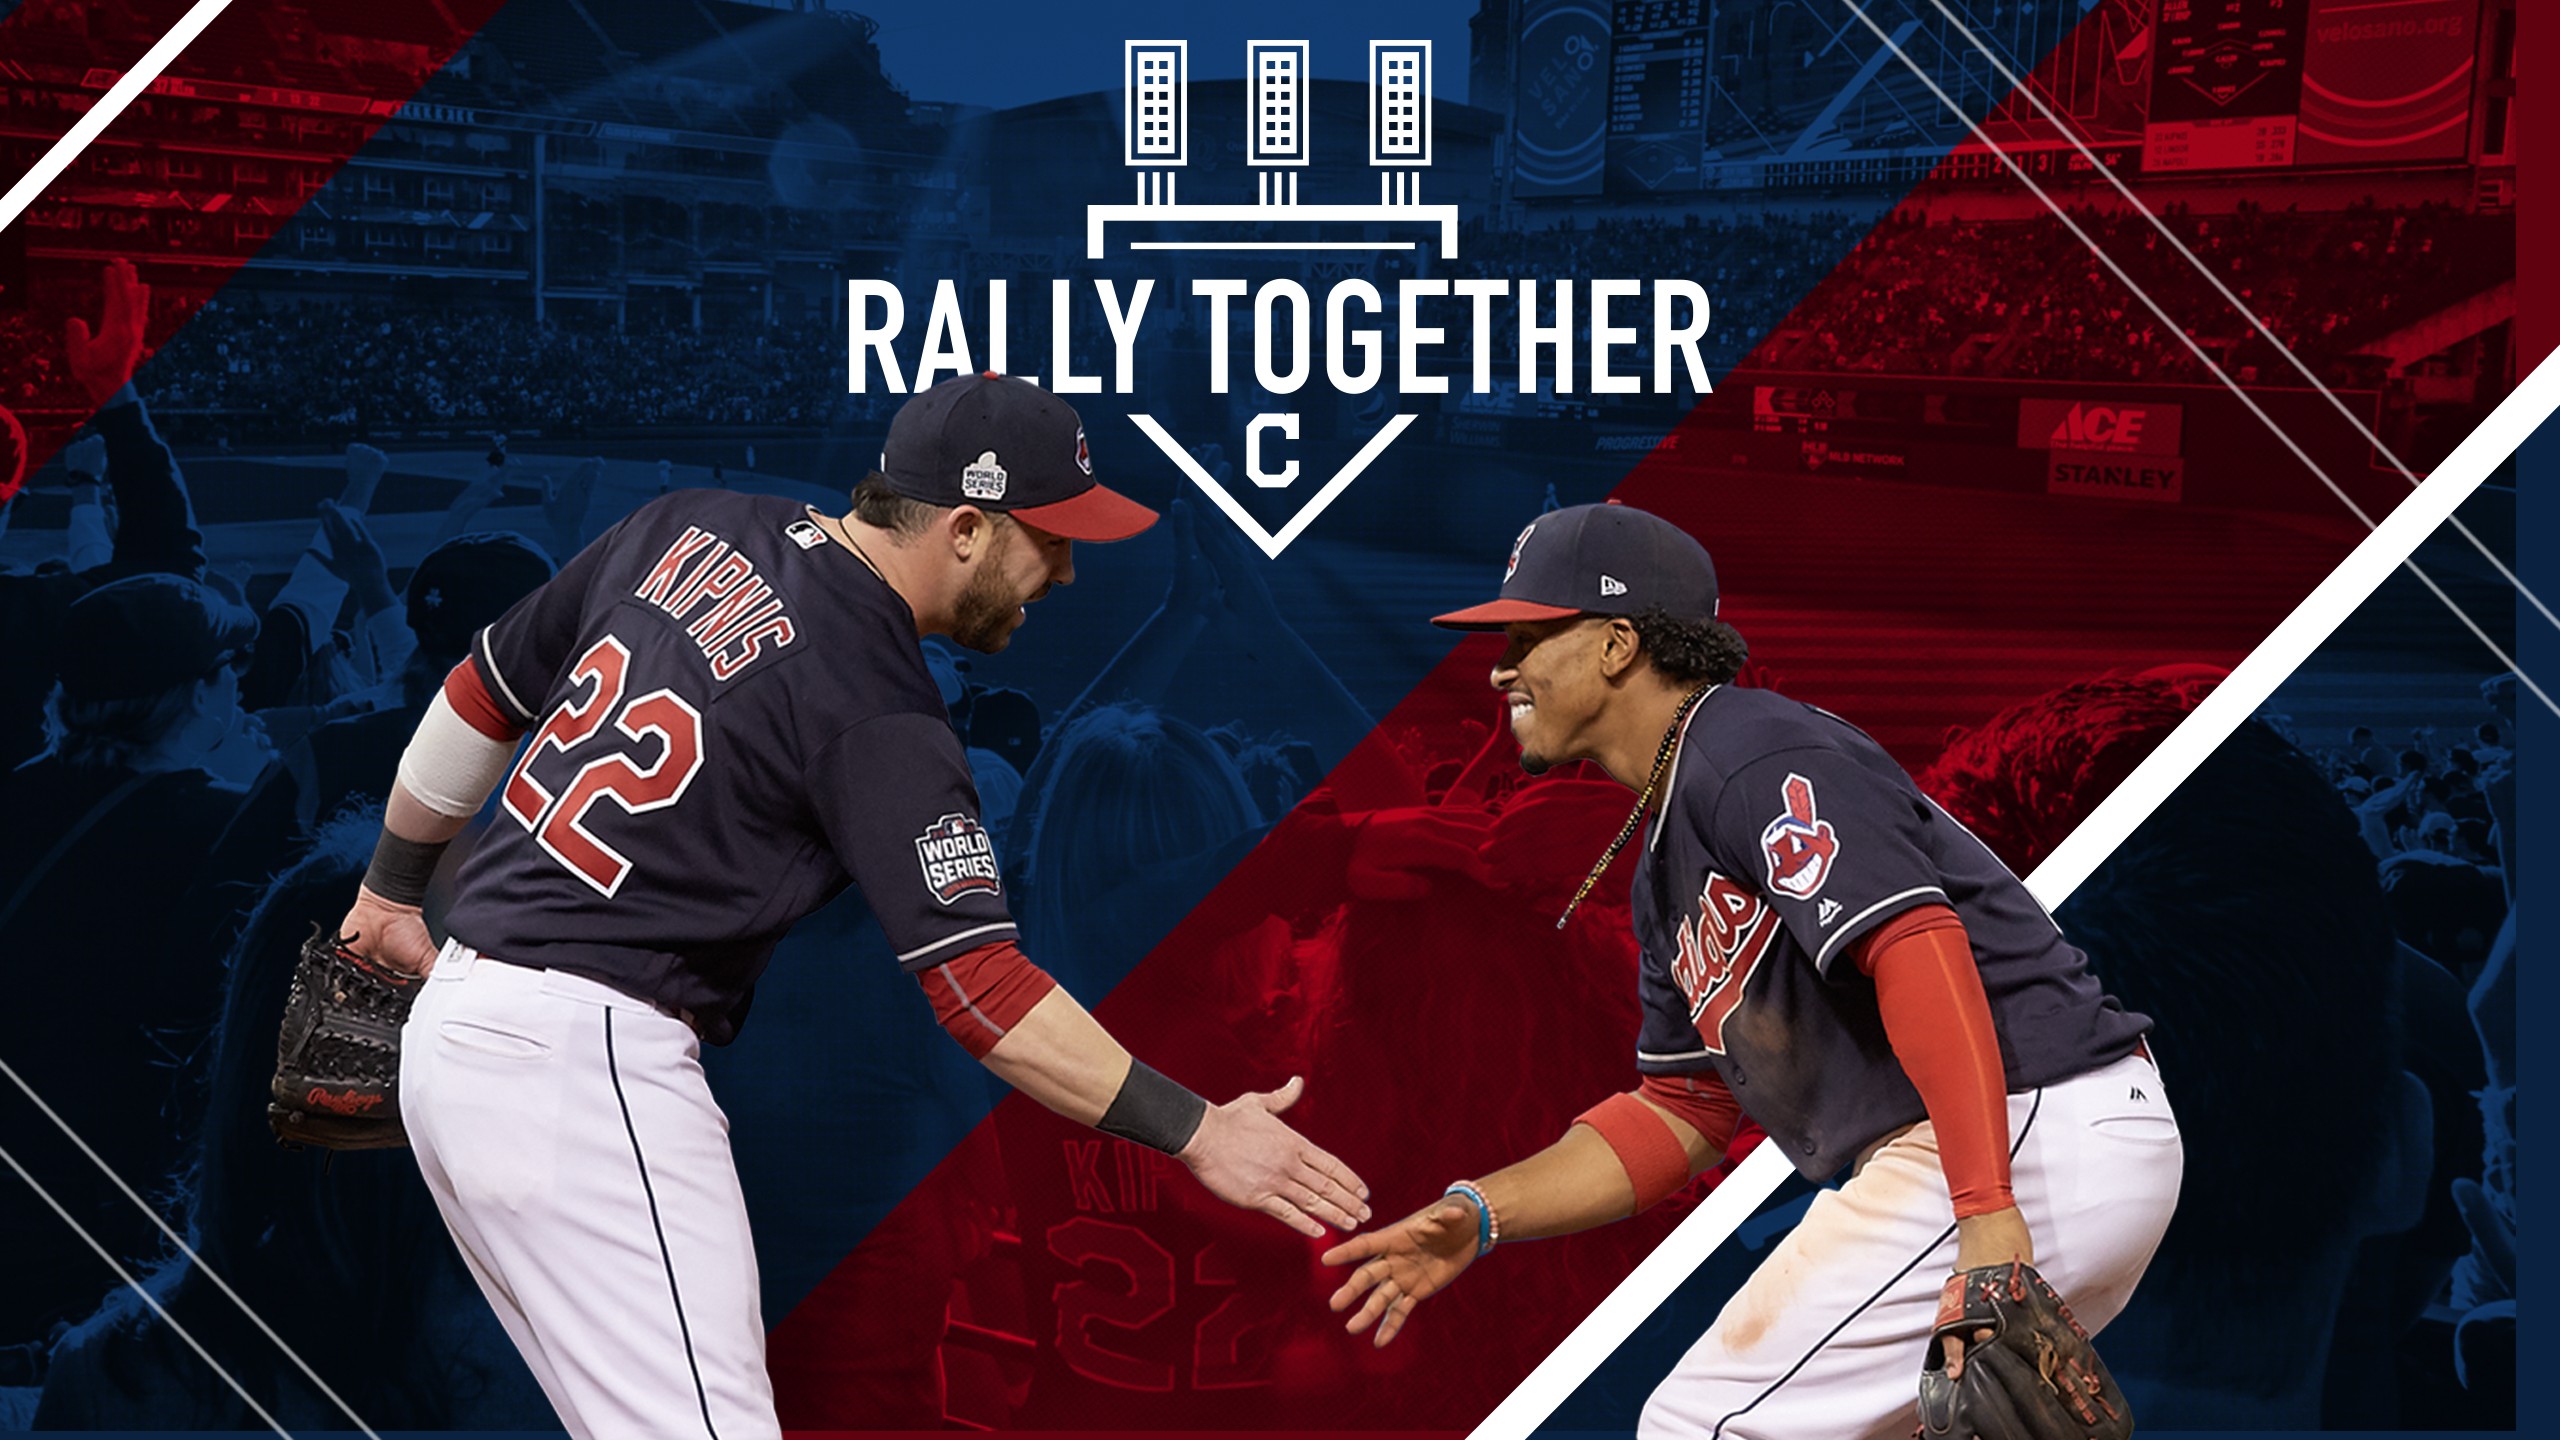 Cleveland Indians players shaking hands. Rally together